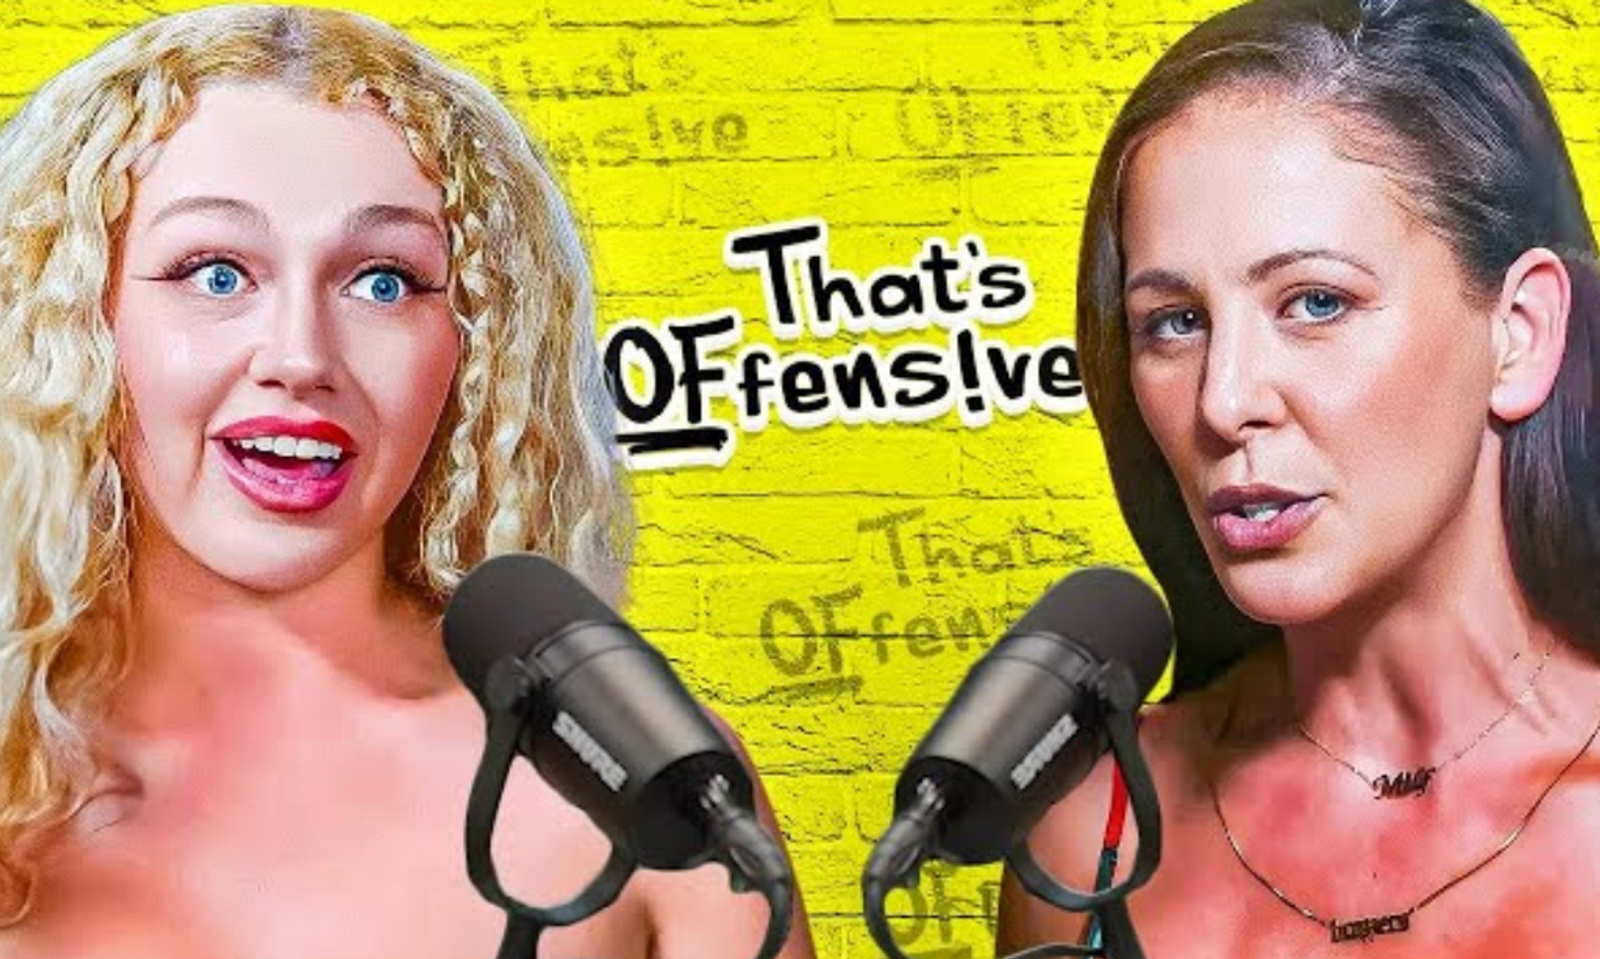 Cherie DeVille Guests on 'That's OFfensive' Podcast